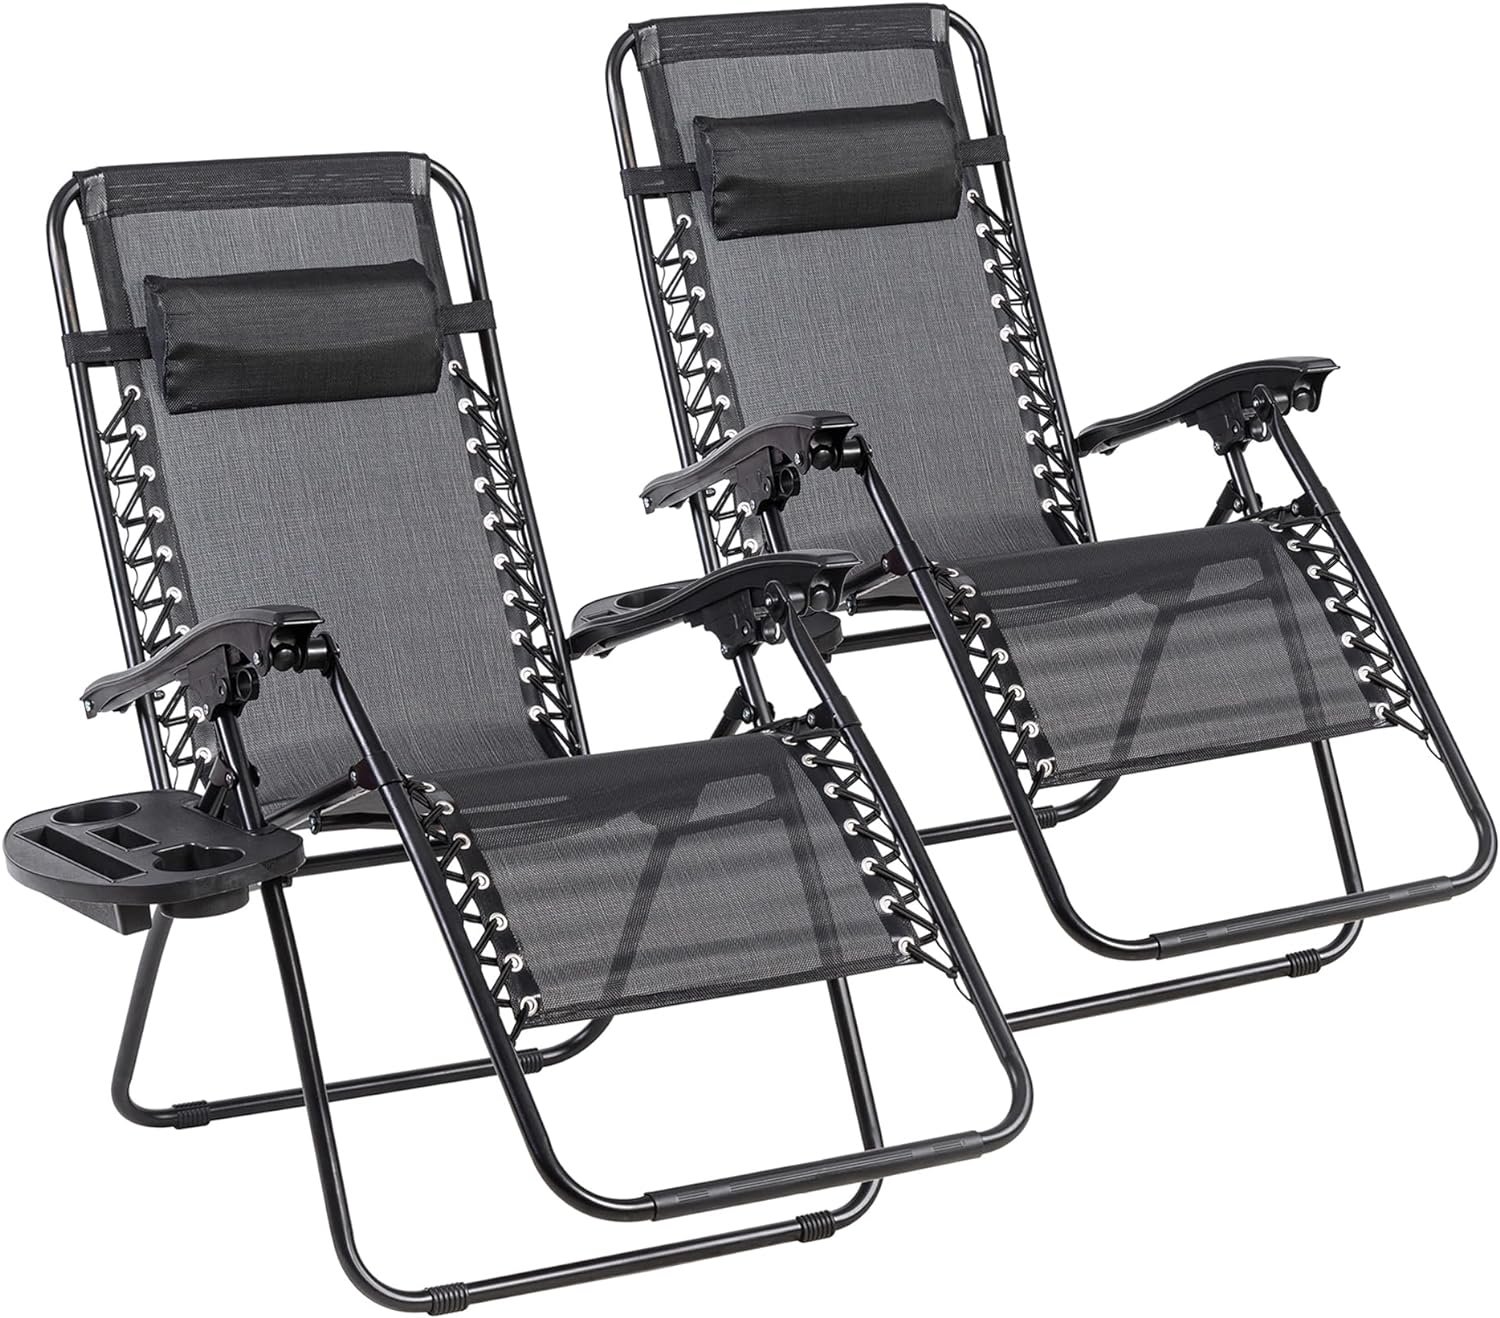 Outdoor Folding Chair Review